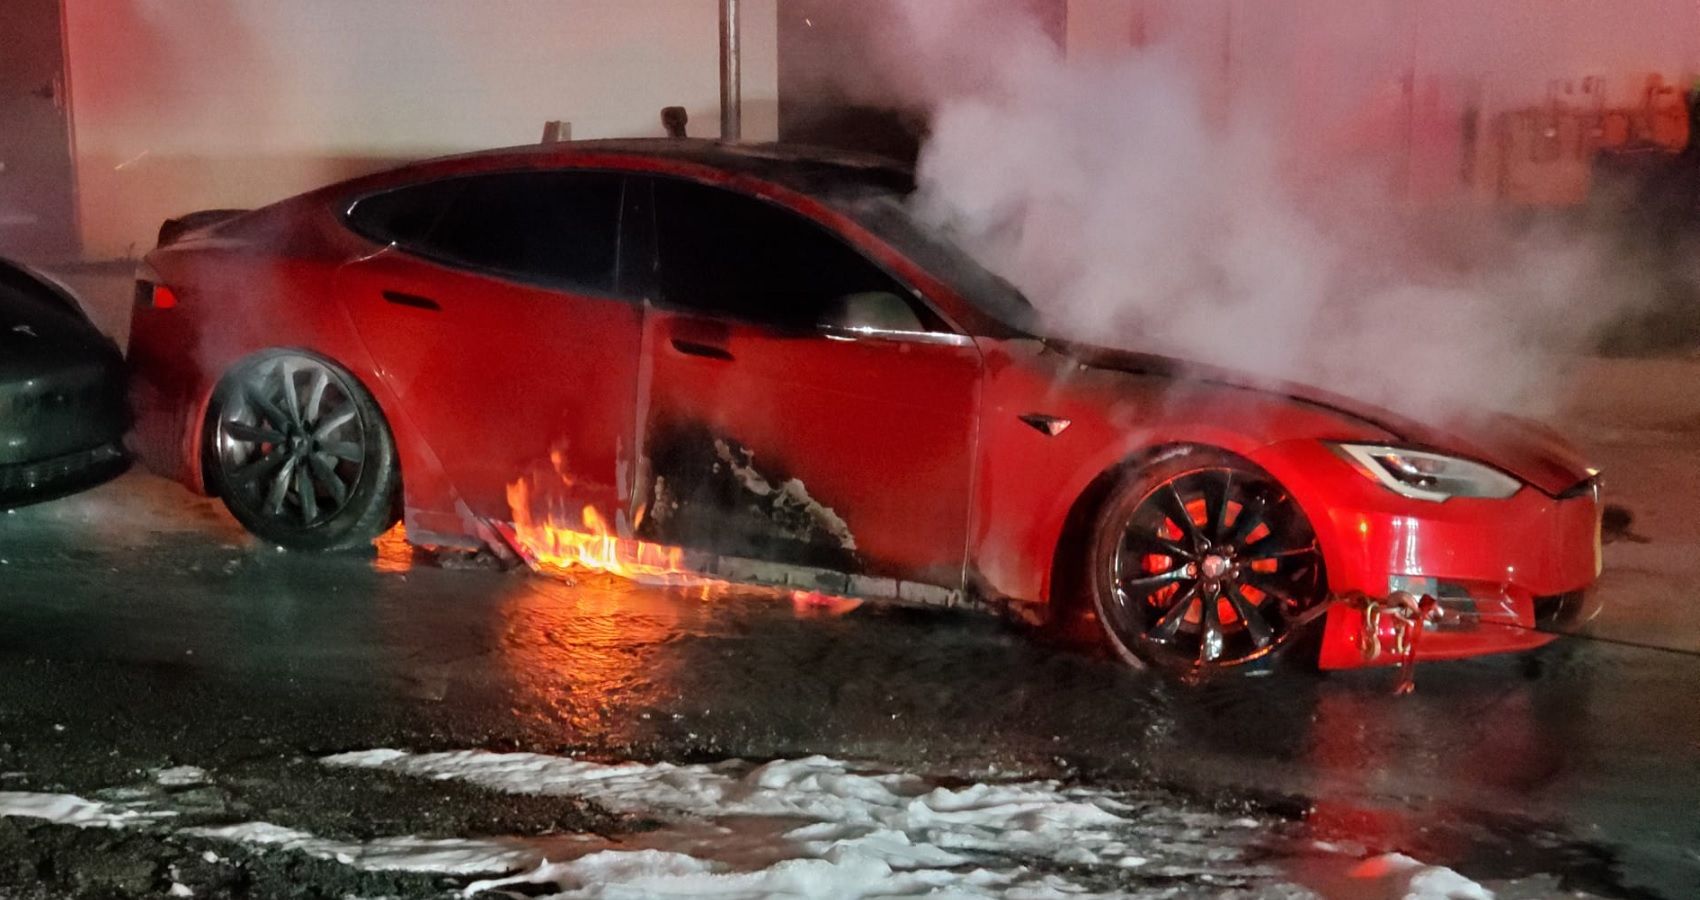 The Truth About Electric Cars Being More Prone To Catching On Fire